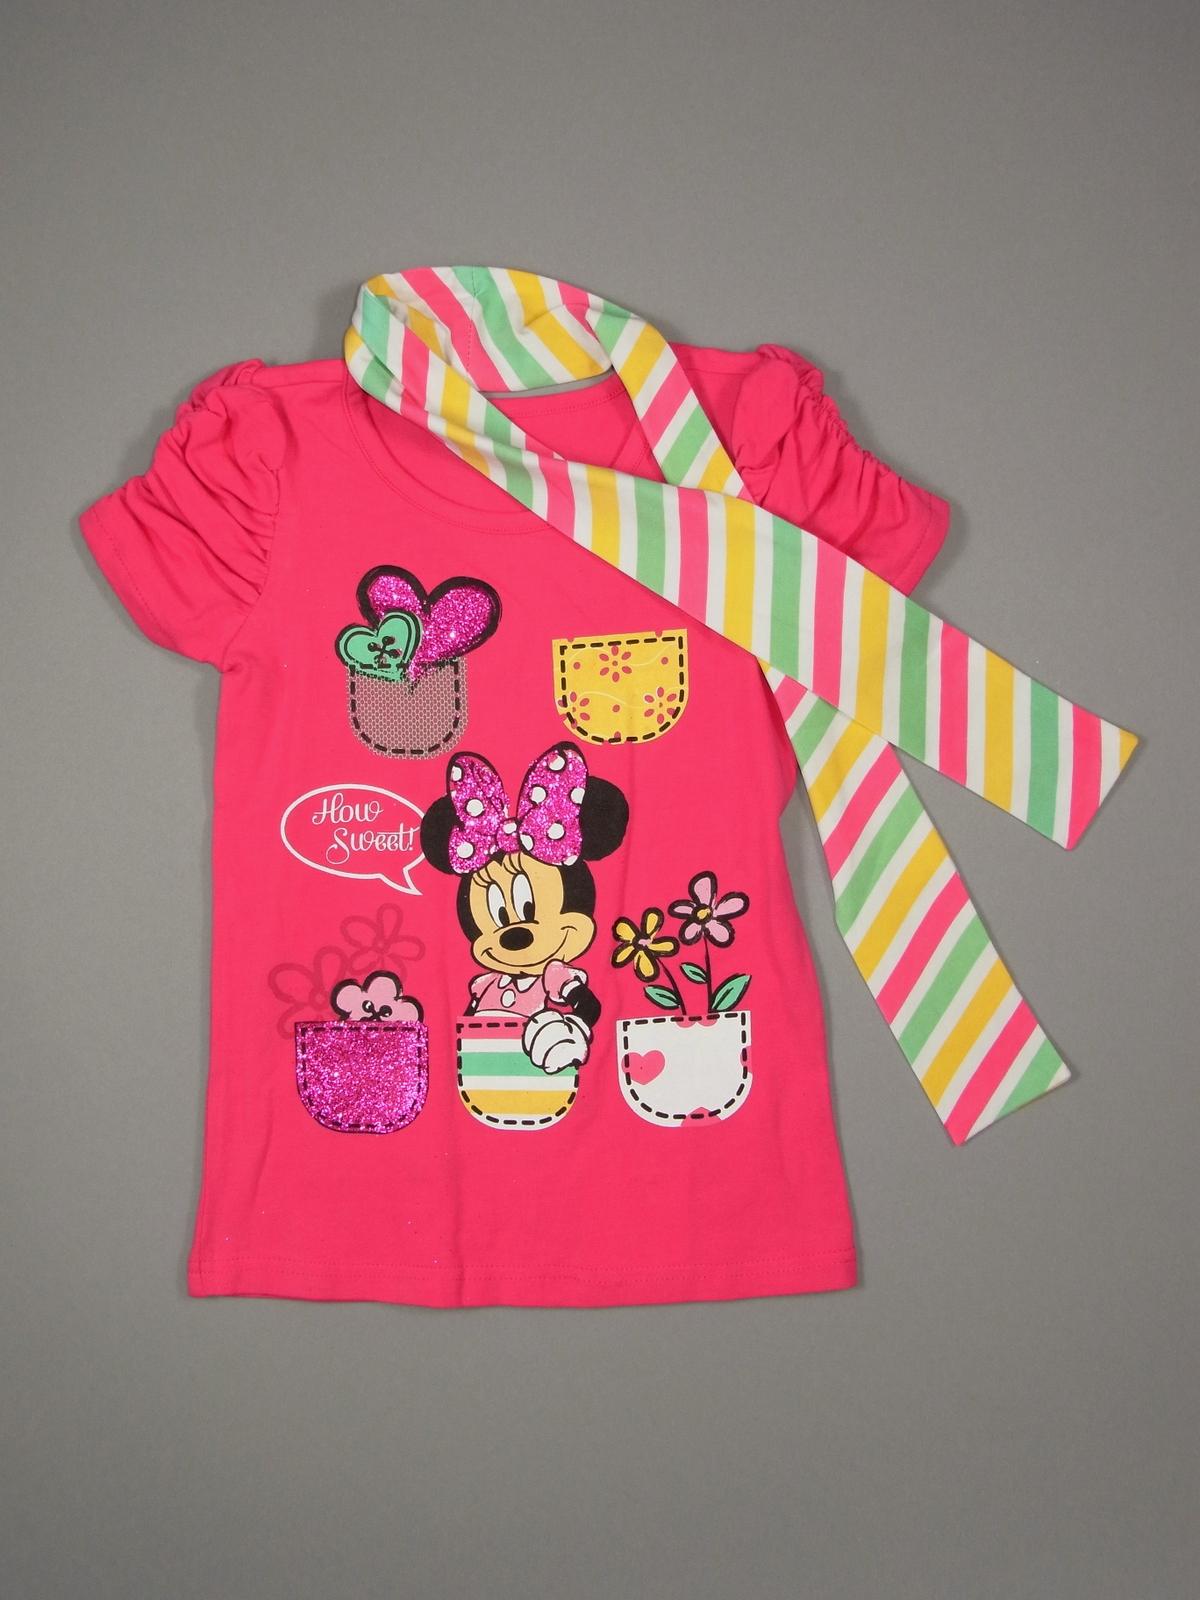 Disney Minnie Mouse Girl's Top & Scarf